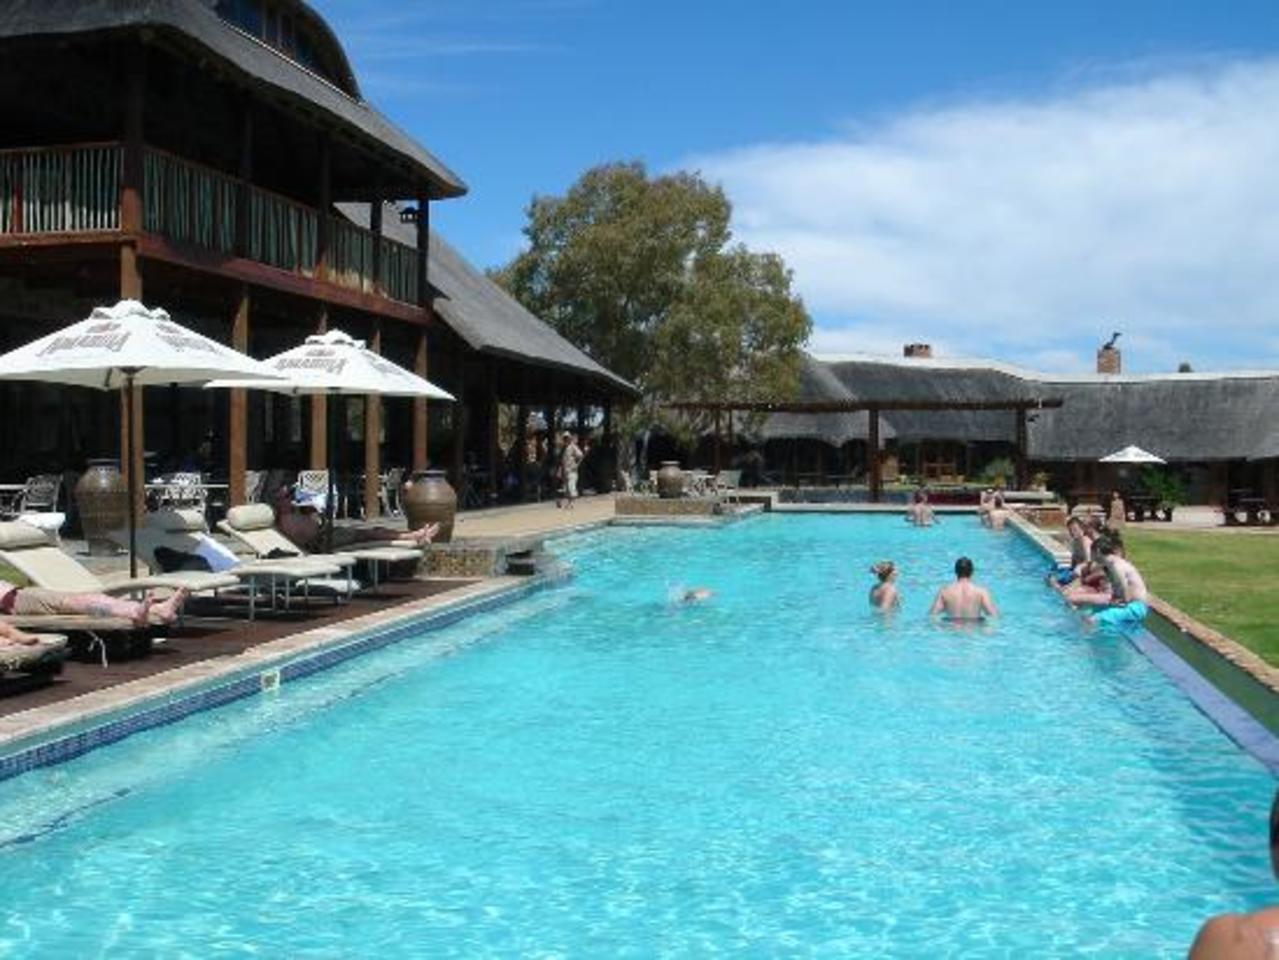 Relax and enjoy the facilities after your Safari